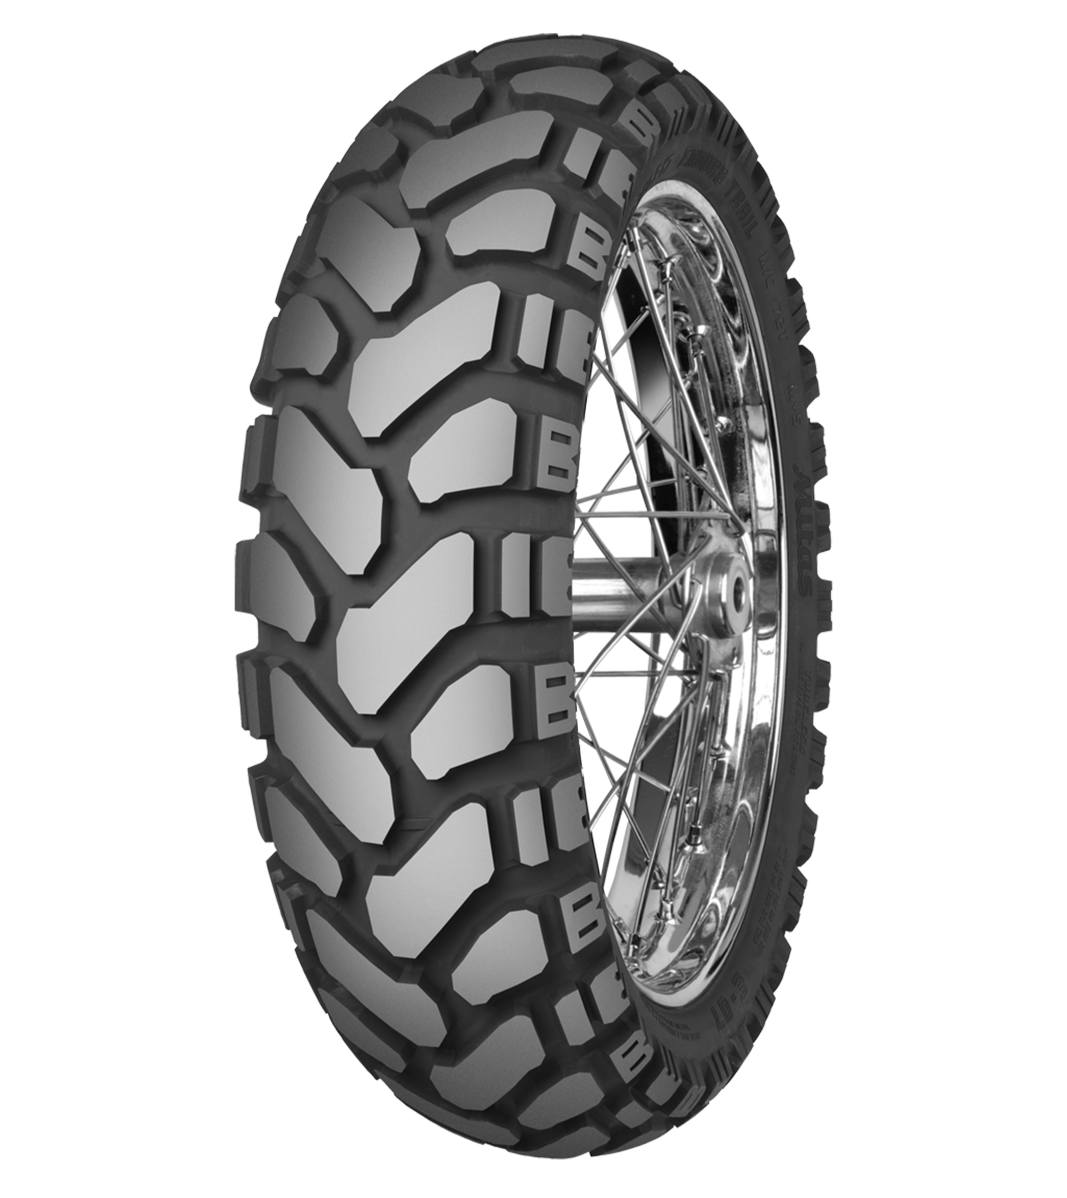 Mitas E-07+ ENDURO TRAIL 150/70B17 Trail ON Trail 69T No Stripe Tubeless Rear Tire, 224059, 150/70B17, Adventure Touring, E Series, E-07+ Enduro Trail, Rear, Trail, Trail ON, Tires - Imported and distributed in North &amp; South America by Lindeco Genuine Powersports - Premier Powersports Equipment and Accessories for Motorcycle Enthusiasts, Professional Riders and Dealers.